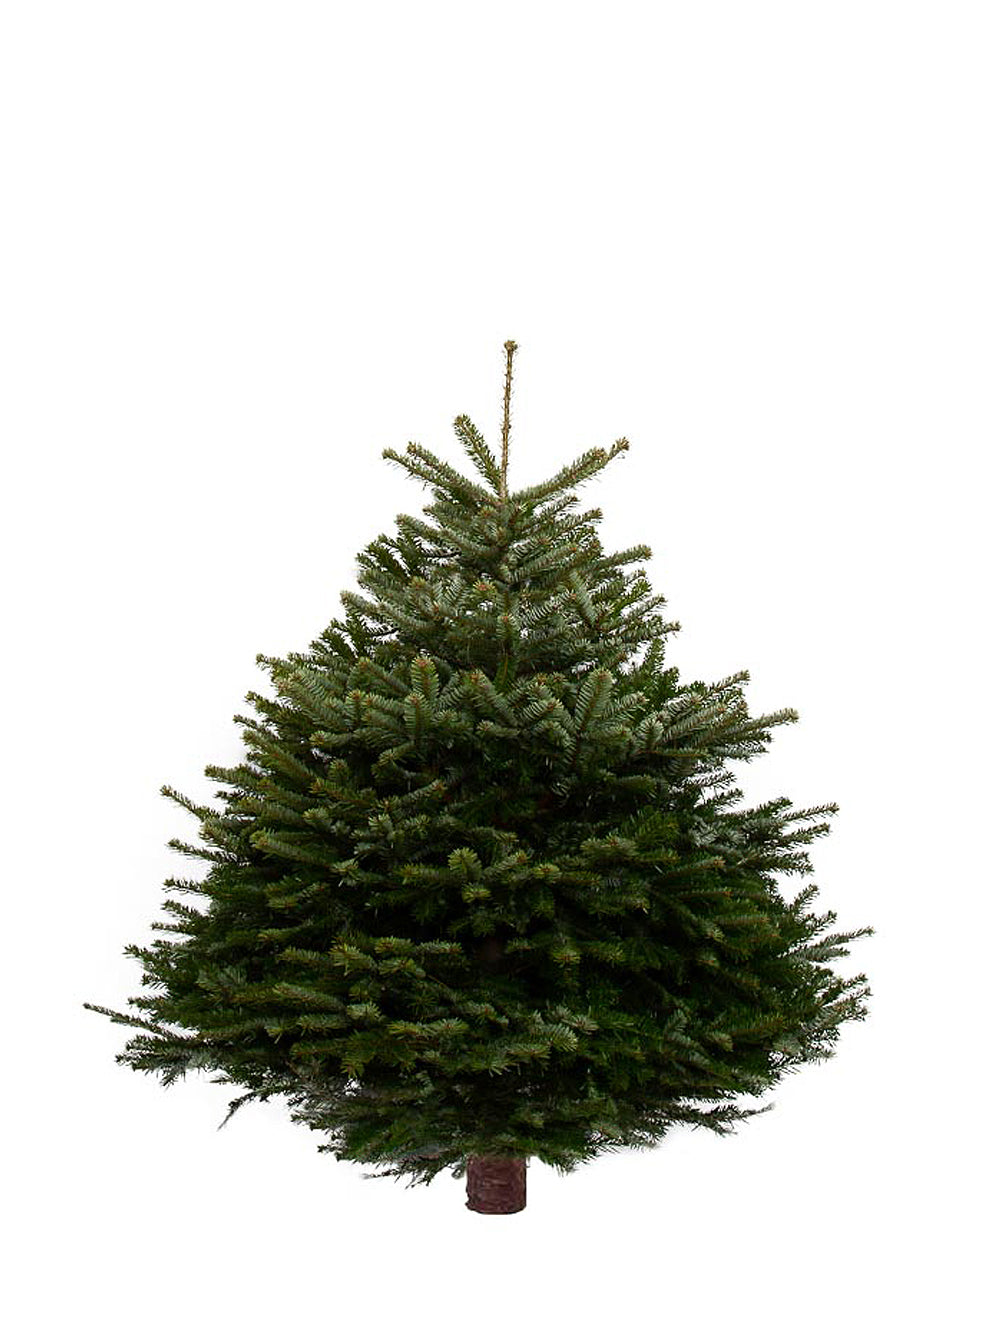 5ft Nordmann Fir Christmas Tree from Pines and Needles